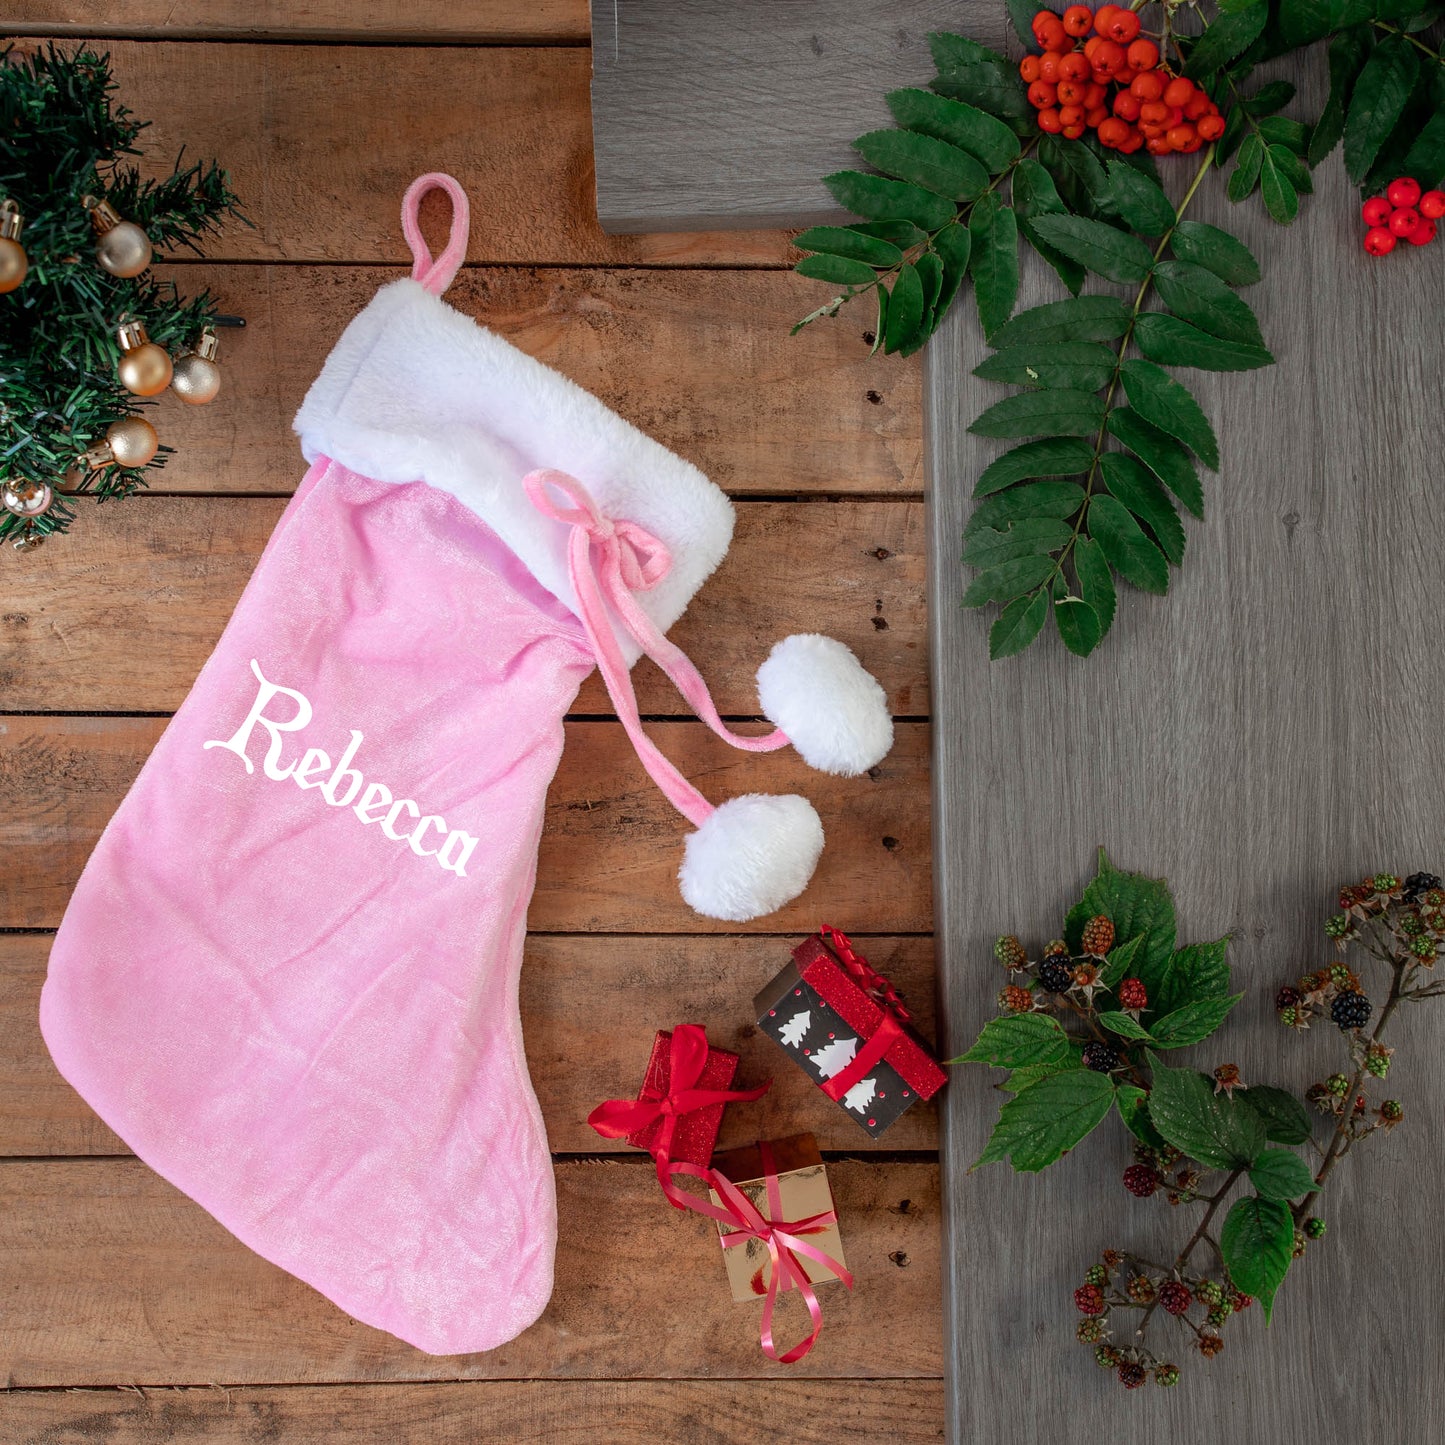 Vinyl Christmas  Stocking Personalised with name & Filled Ready to gift  - Always Looking Good -   